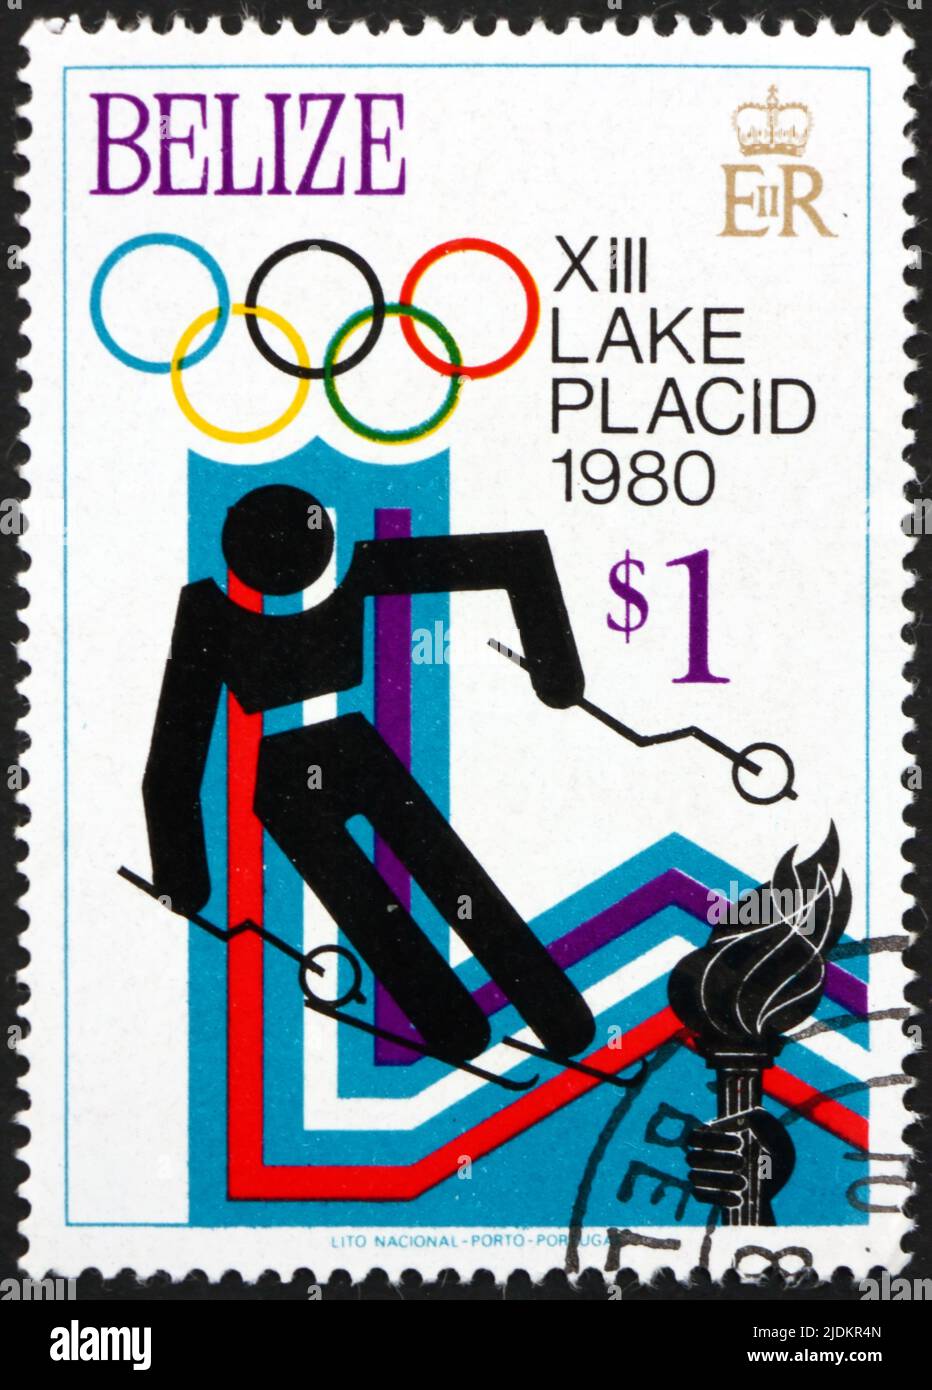 BELIZE - CIRCA 1979: a stamp printed in Belize shows Downhill skiing, 1980 Winter Olympics, Lake Placid, circa 1979 Stock Photo